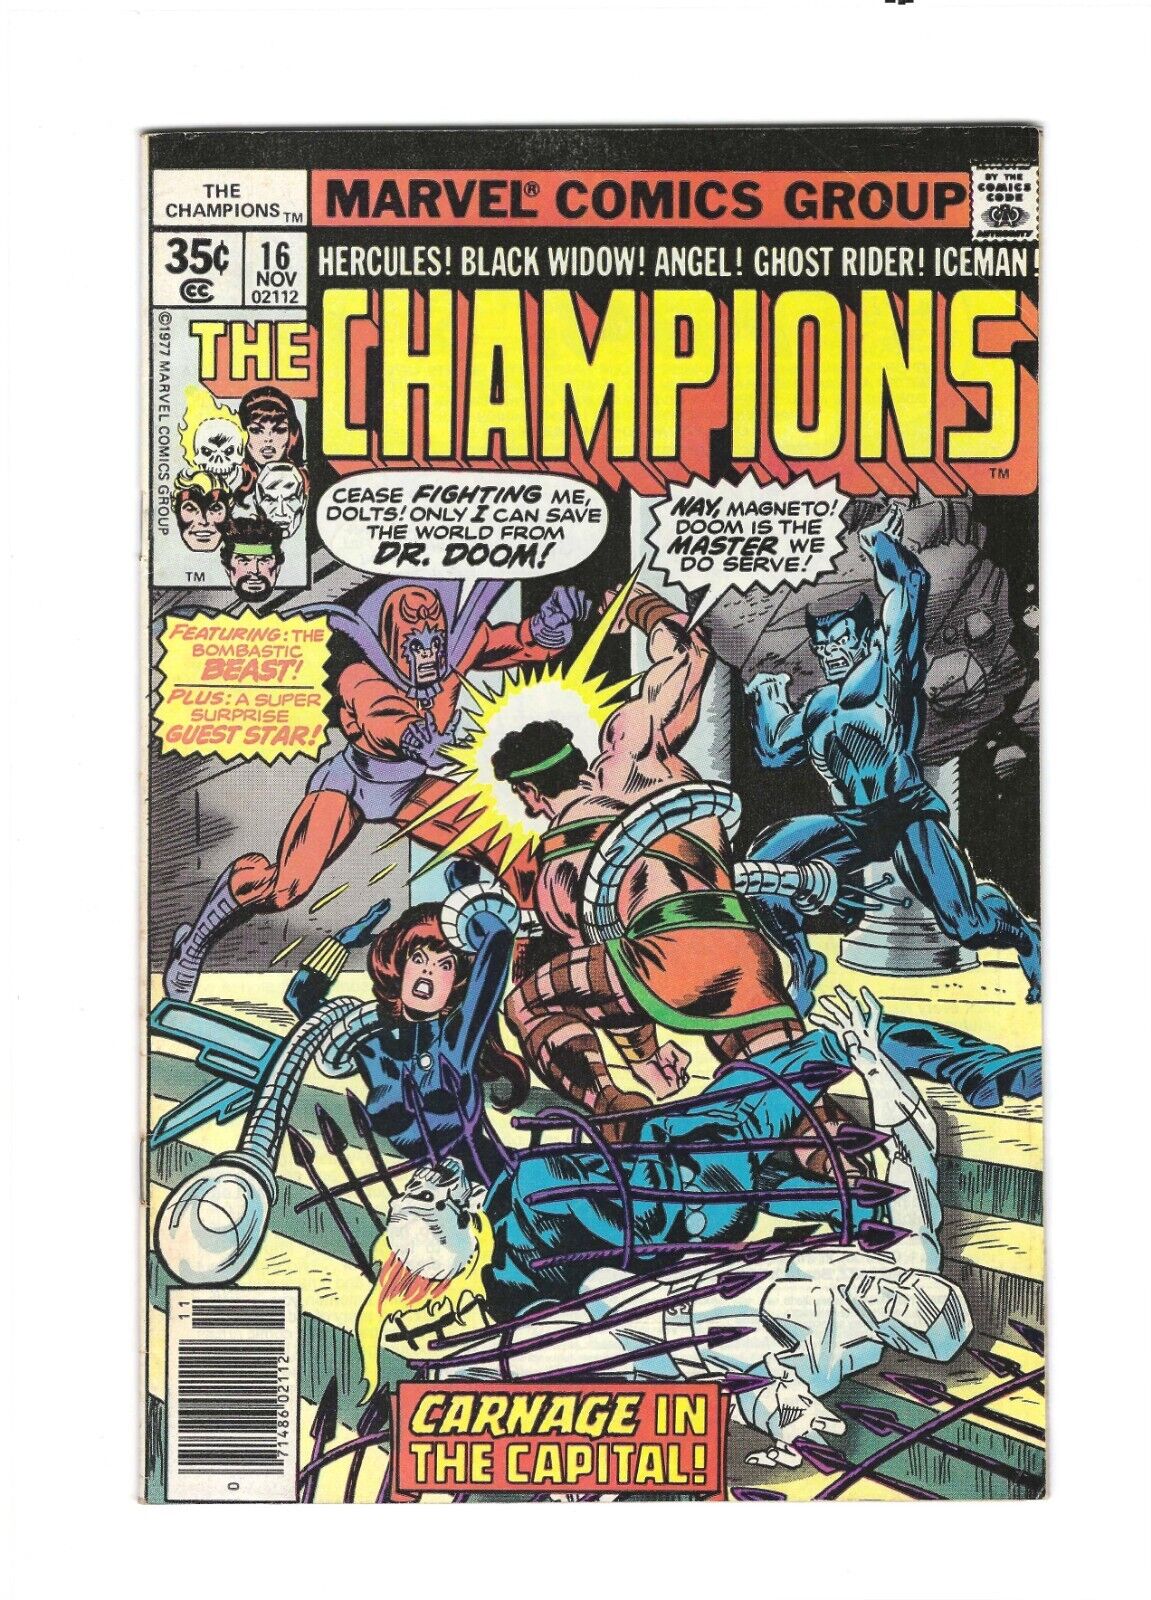 The Champions #16: Dry Cleaned: Pressed: Bagged: Boarded: FN 6.0